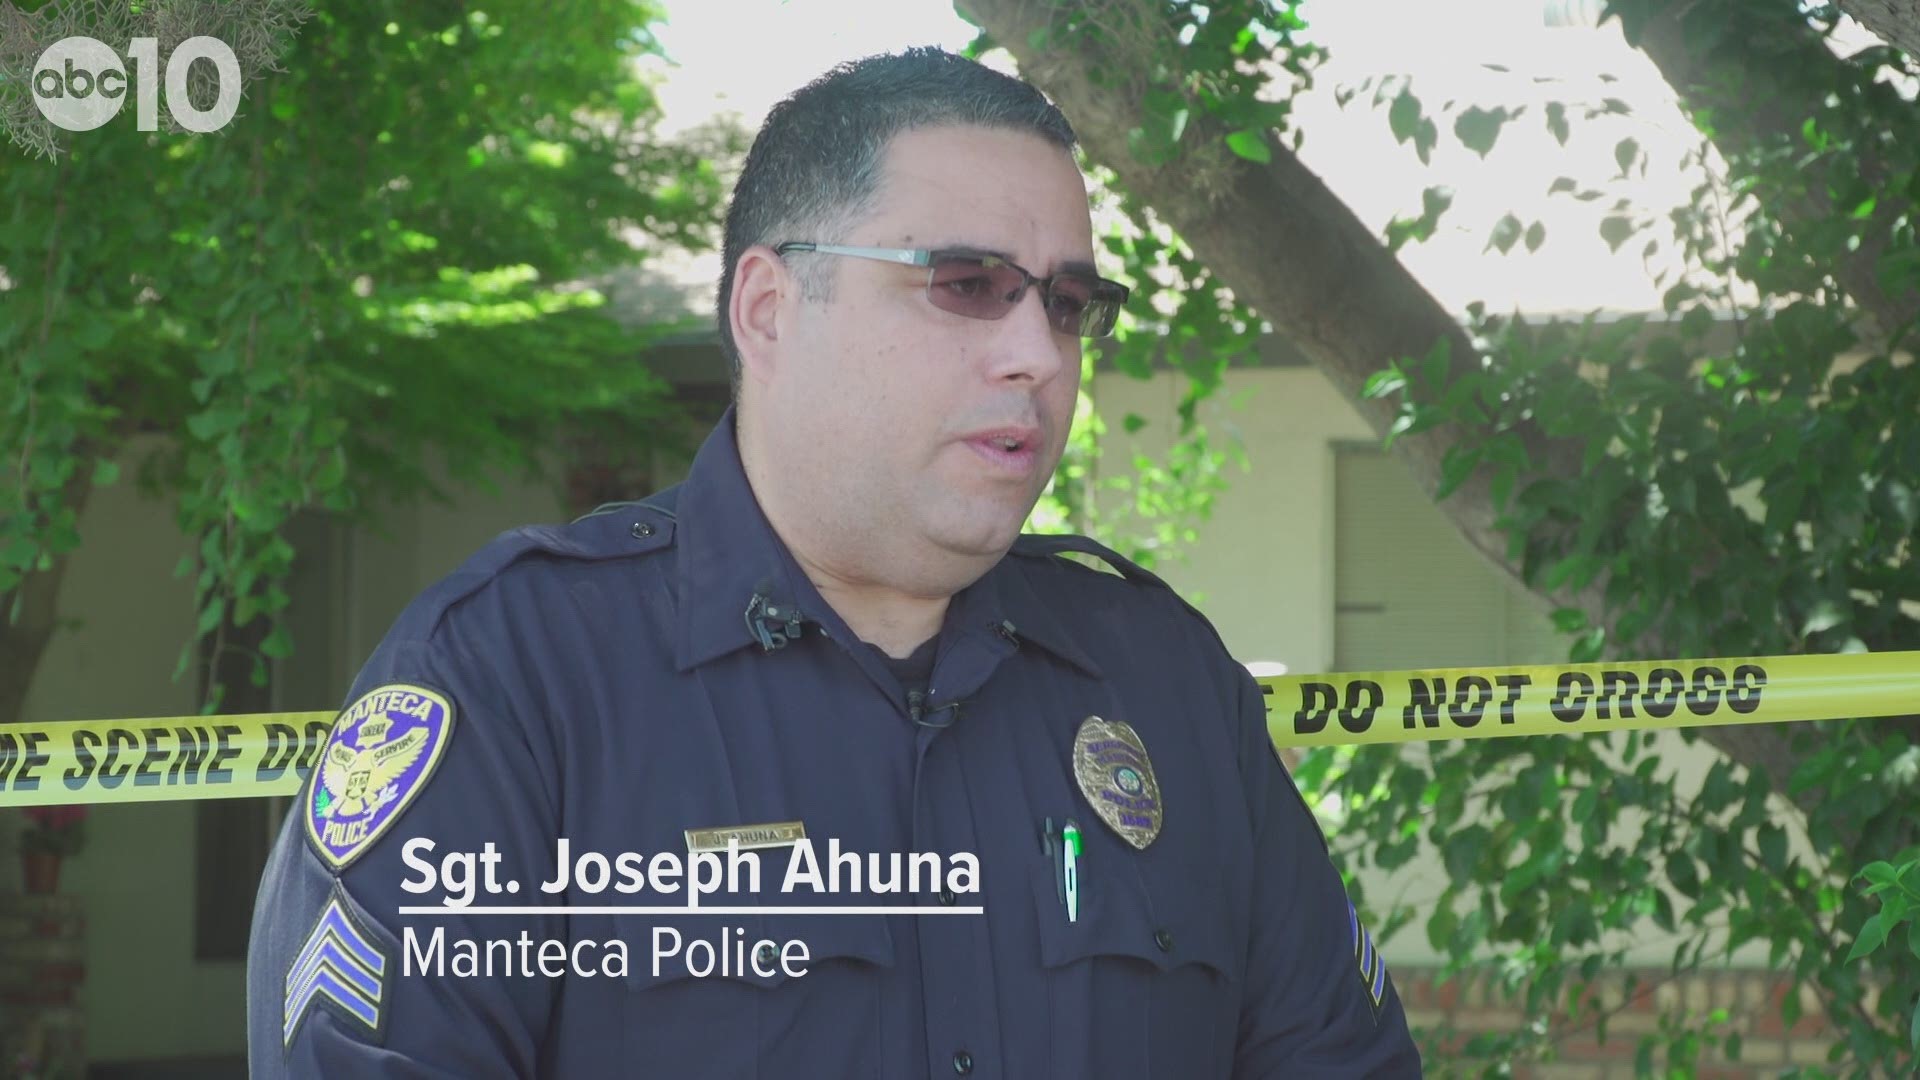 Manteca Police said the man shot and killed at a home on Verda Court in Manteca knew his shooter. On Friday police said the house is currently under construction and both men were believed to be there to discuss work.